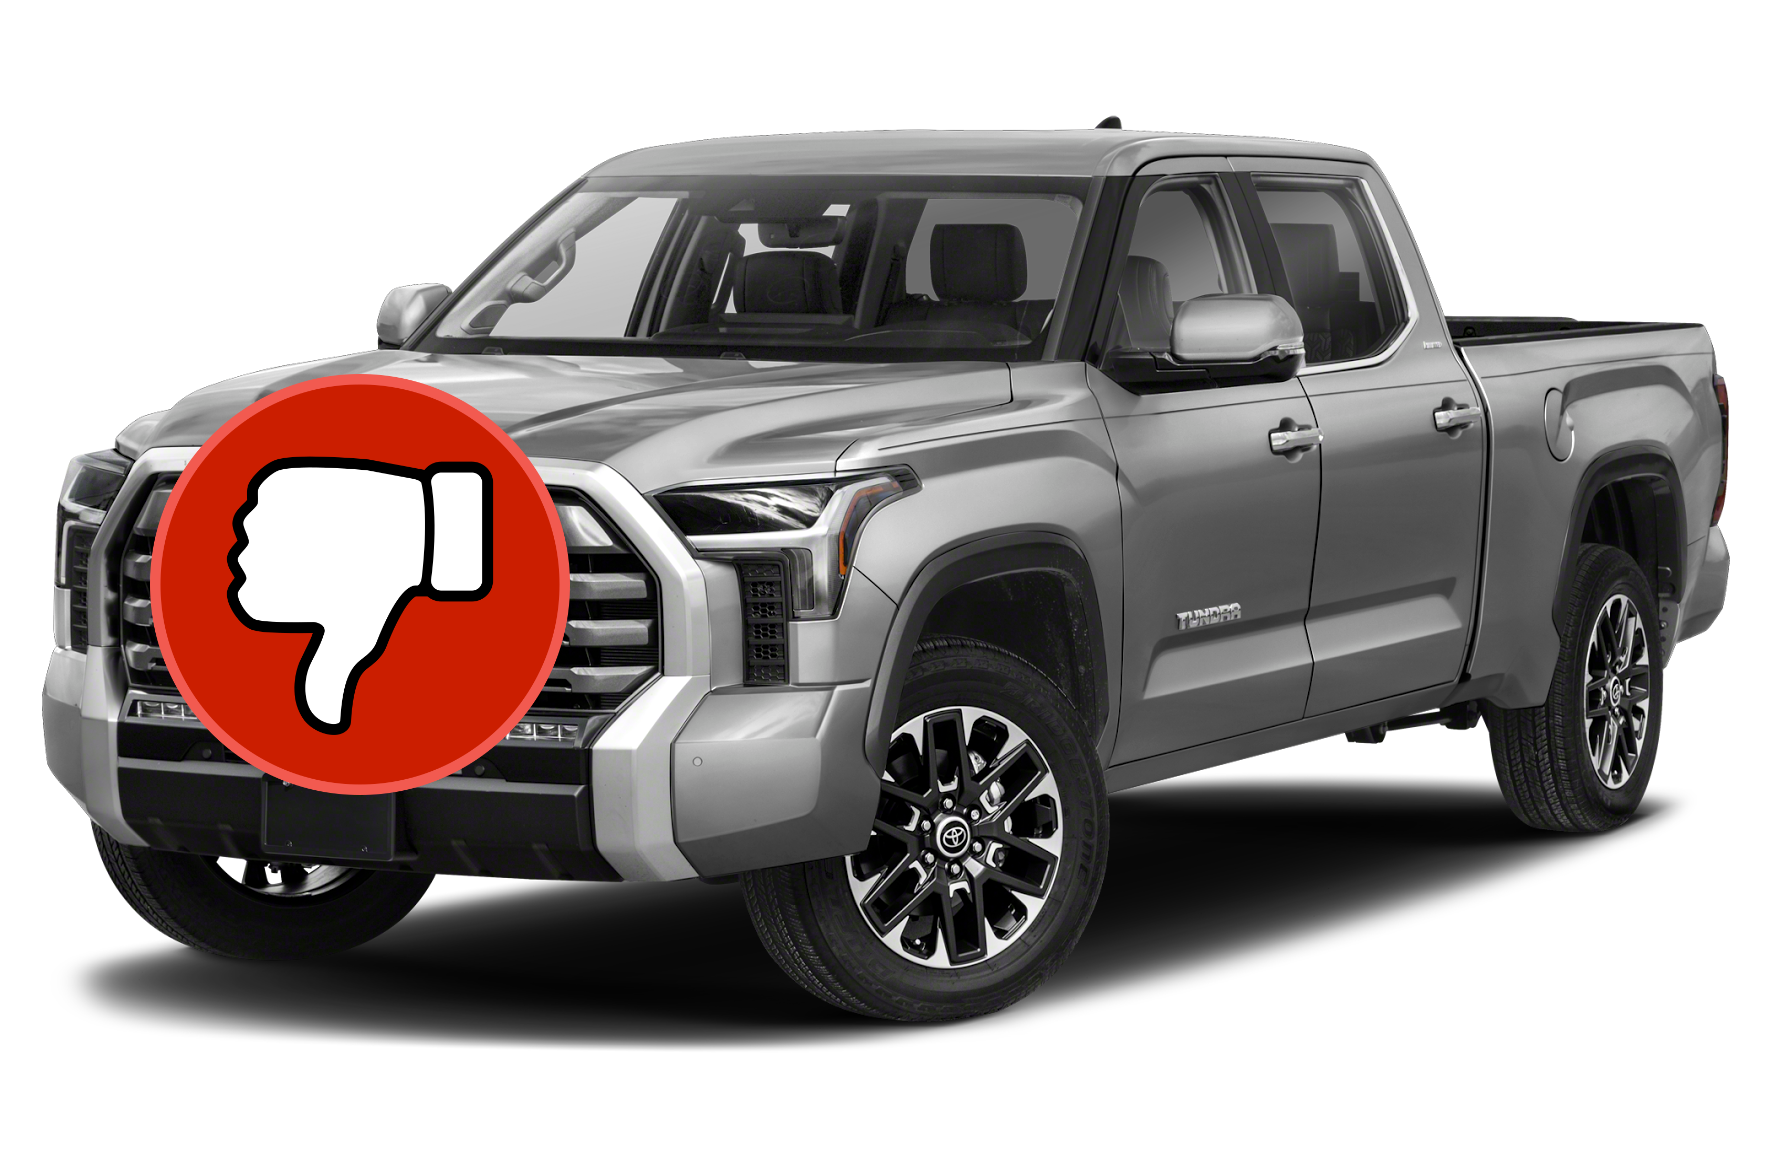 4 reasons why you should not upgrade your V8 Toyota vehicle for a new one?